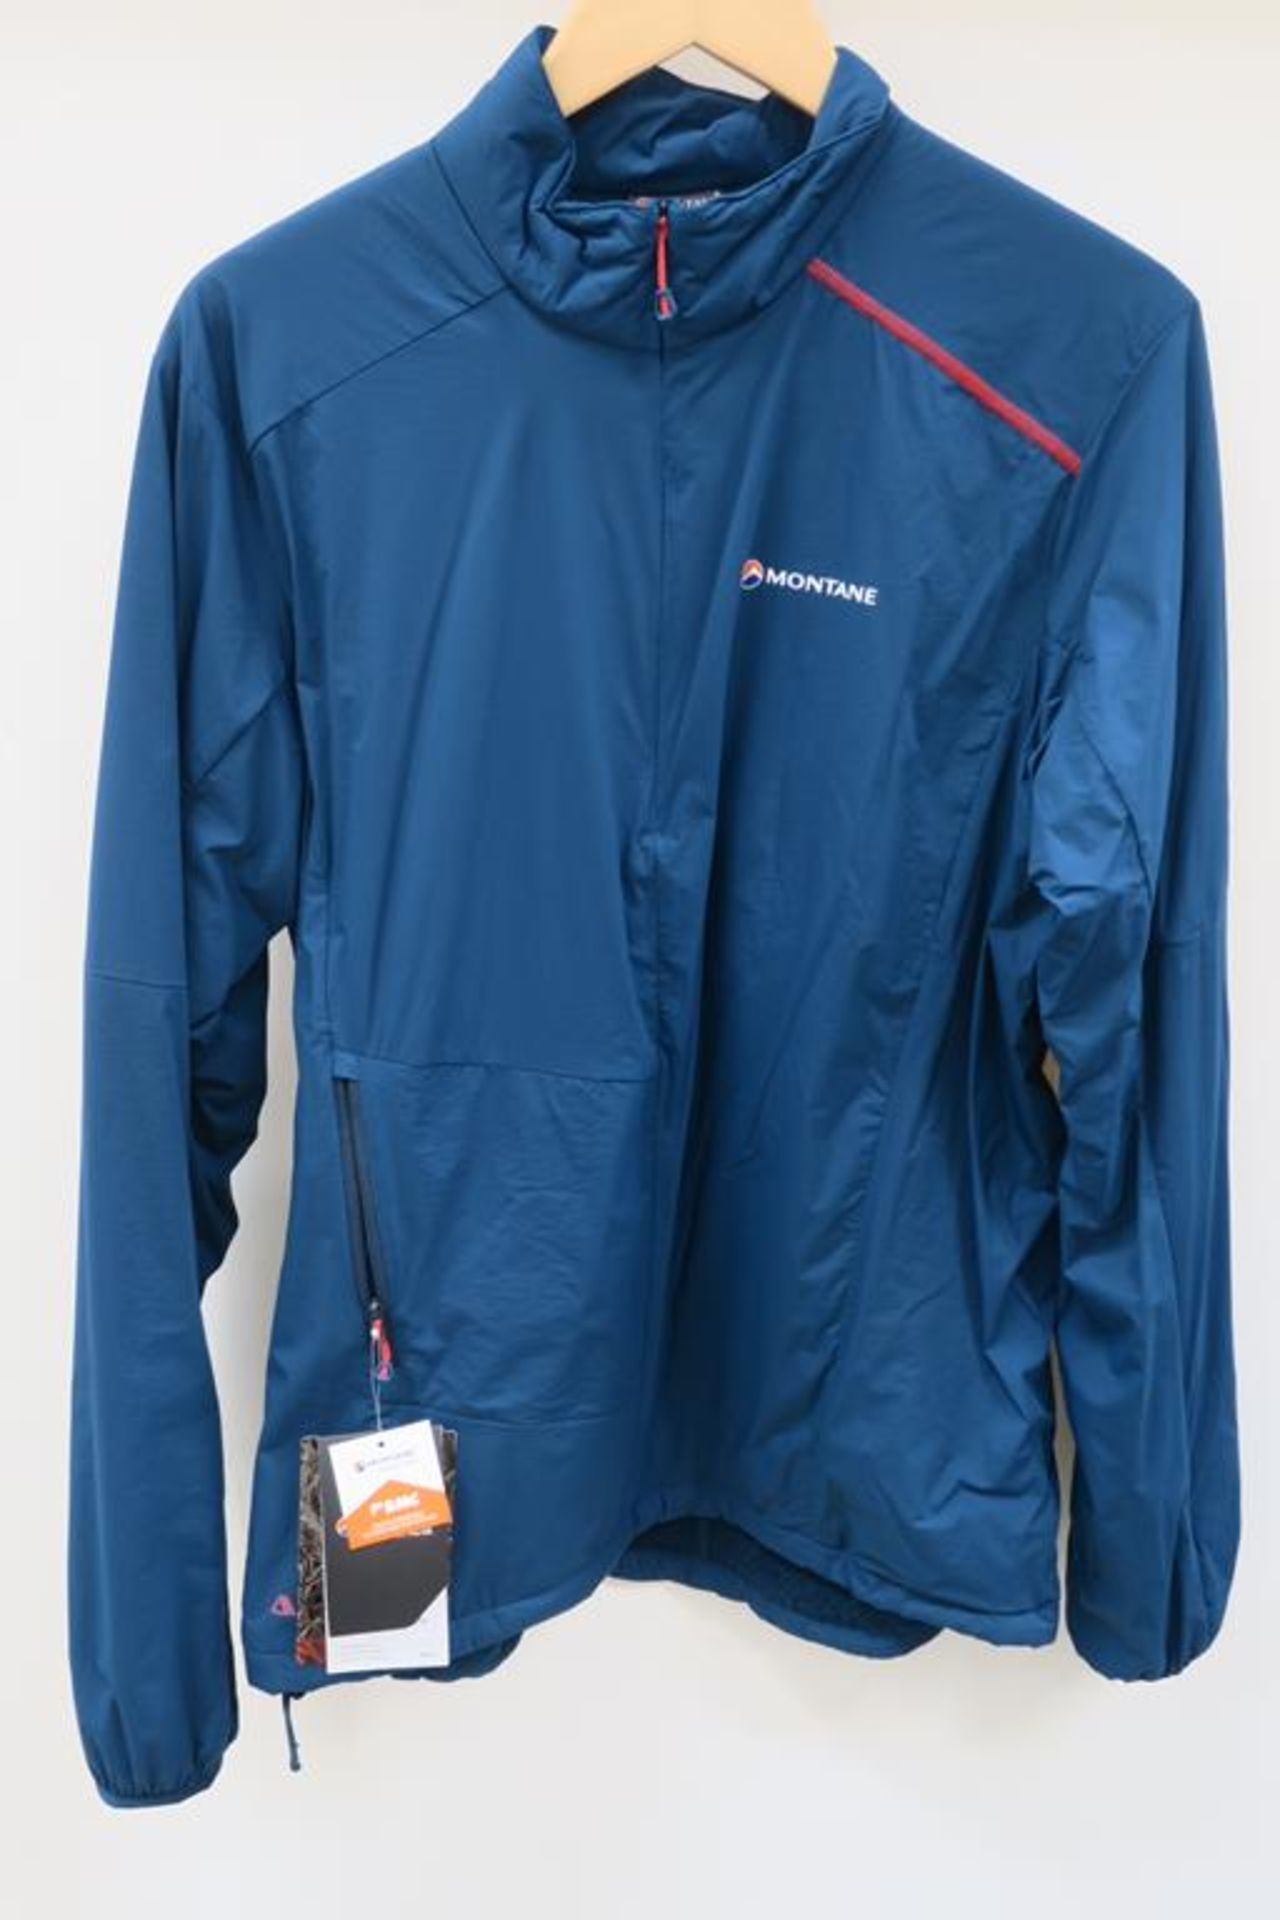 Montane Ember Pull-On Mens Jacket in Narwhal Blue size Large